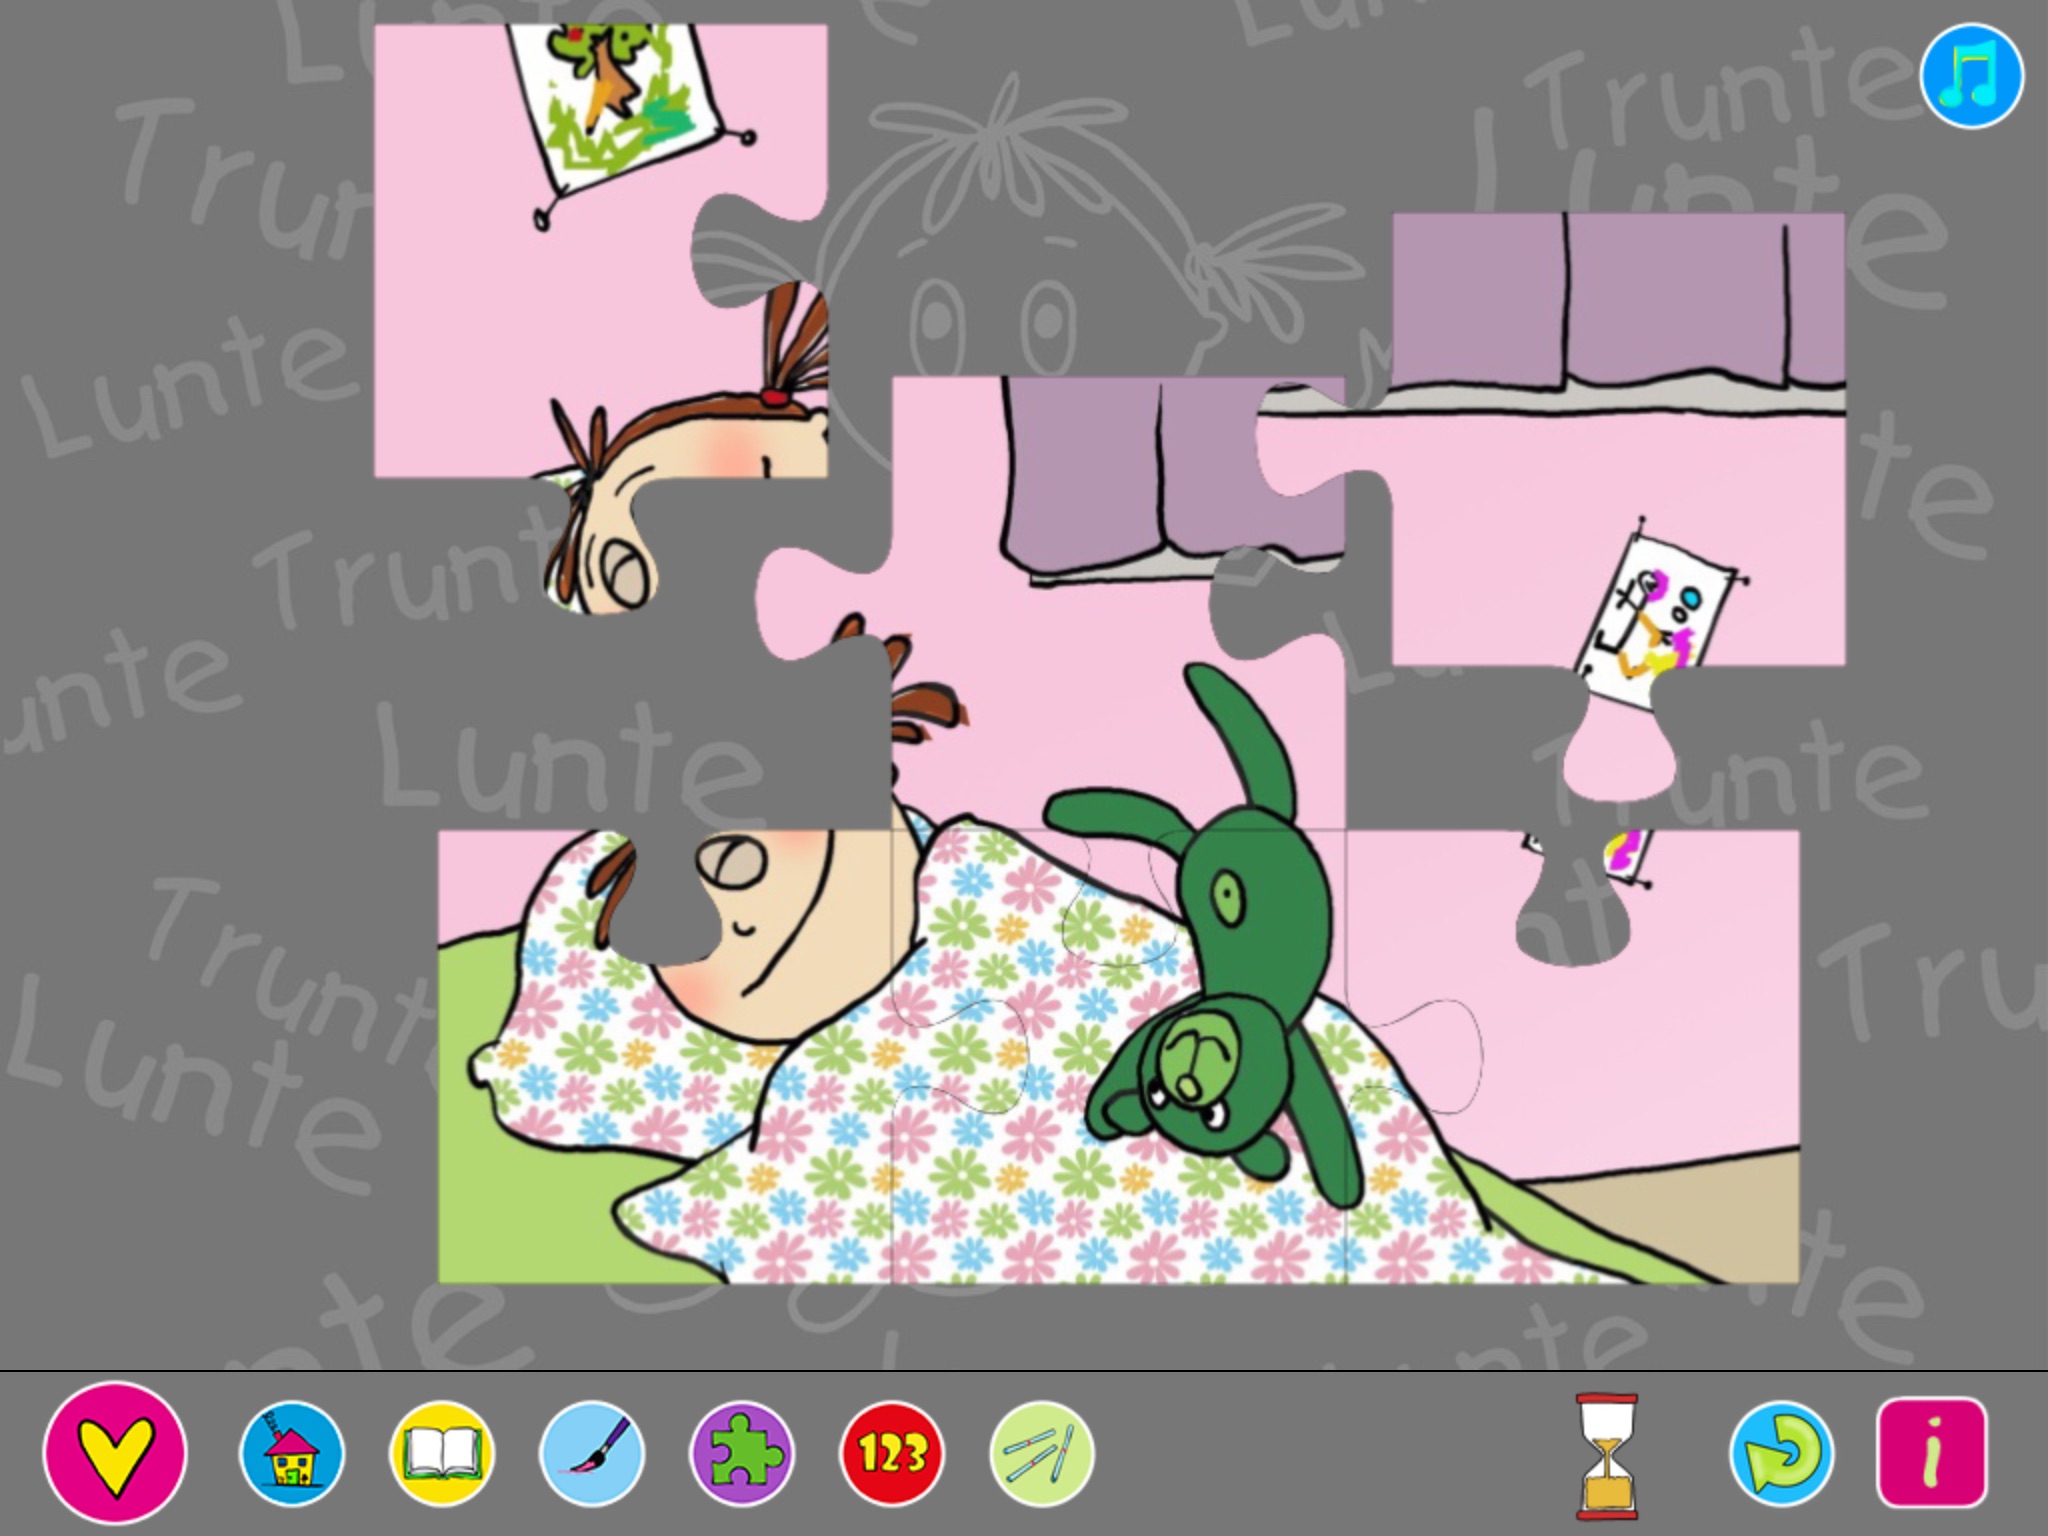 Millie & Teddy children's books - read, play and paint screenshot 4